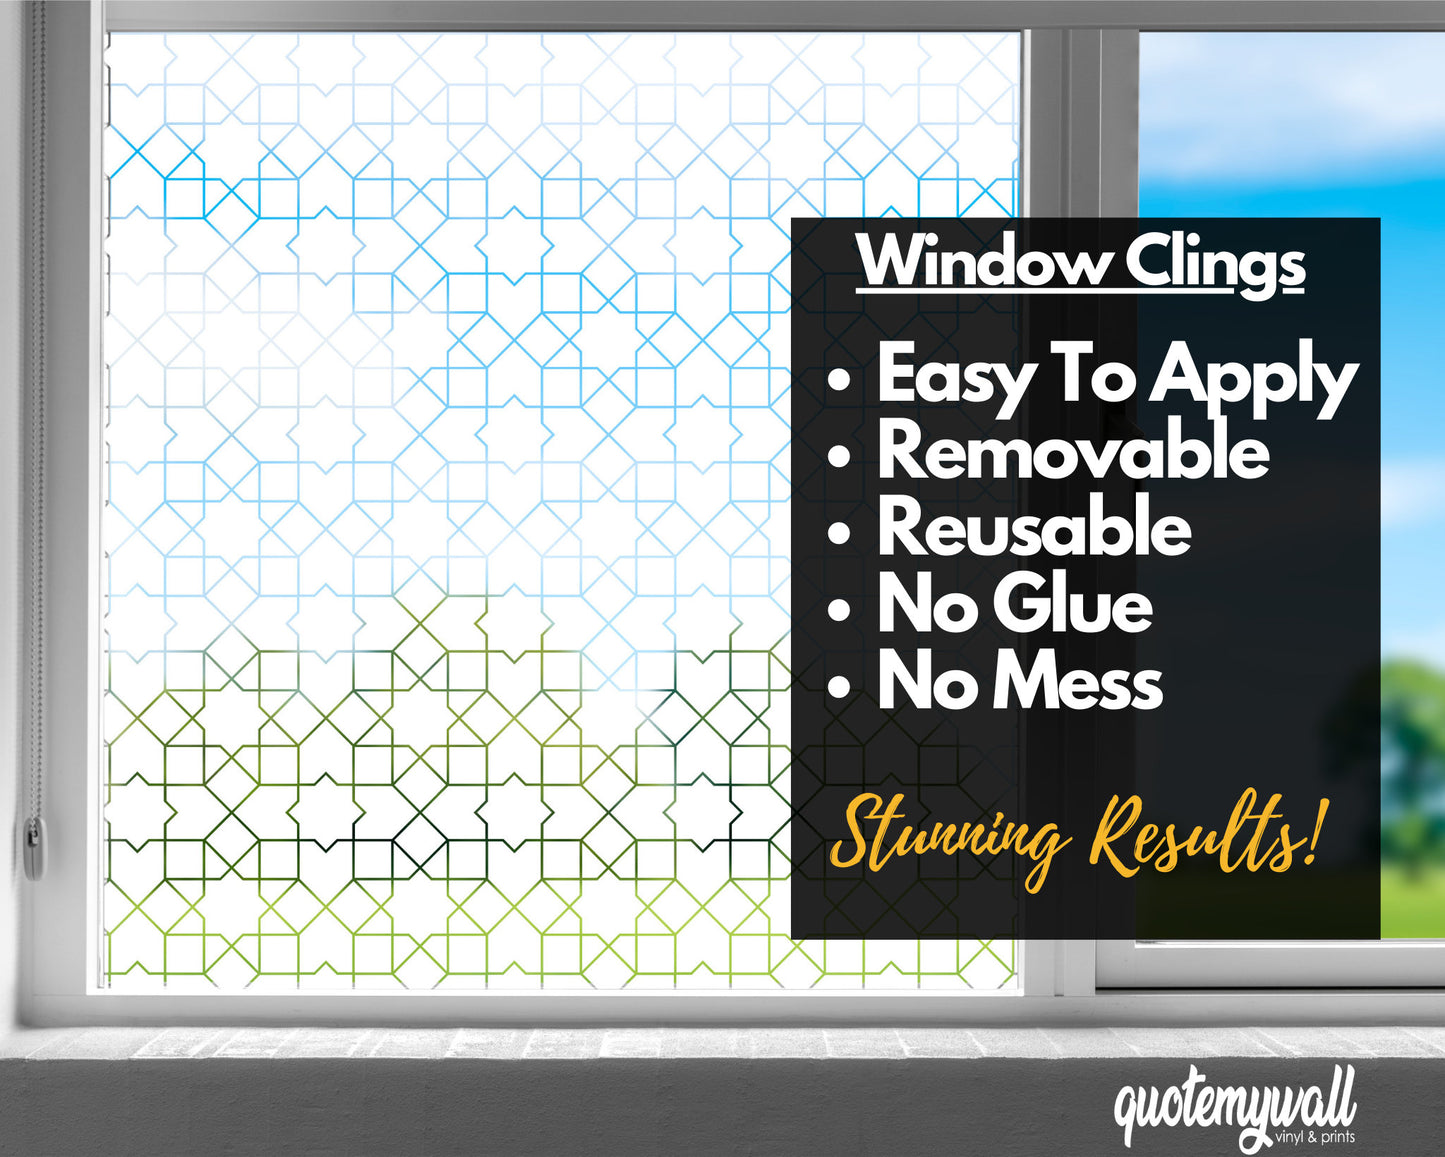 Window Privacy Film For Glass Square Abstract Frosted Clear Glass Window Filmn Cling Static Removable Reuse DIY Home UV Rays Protection